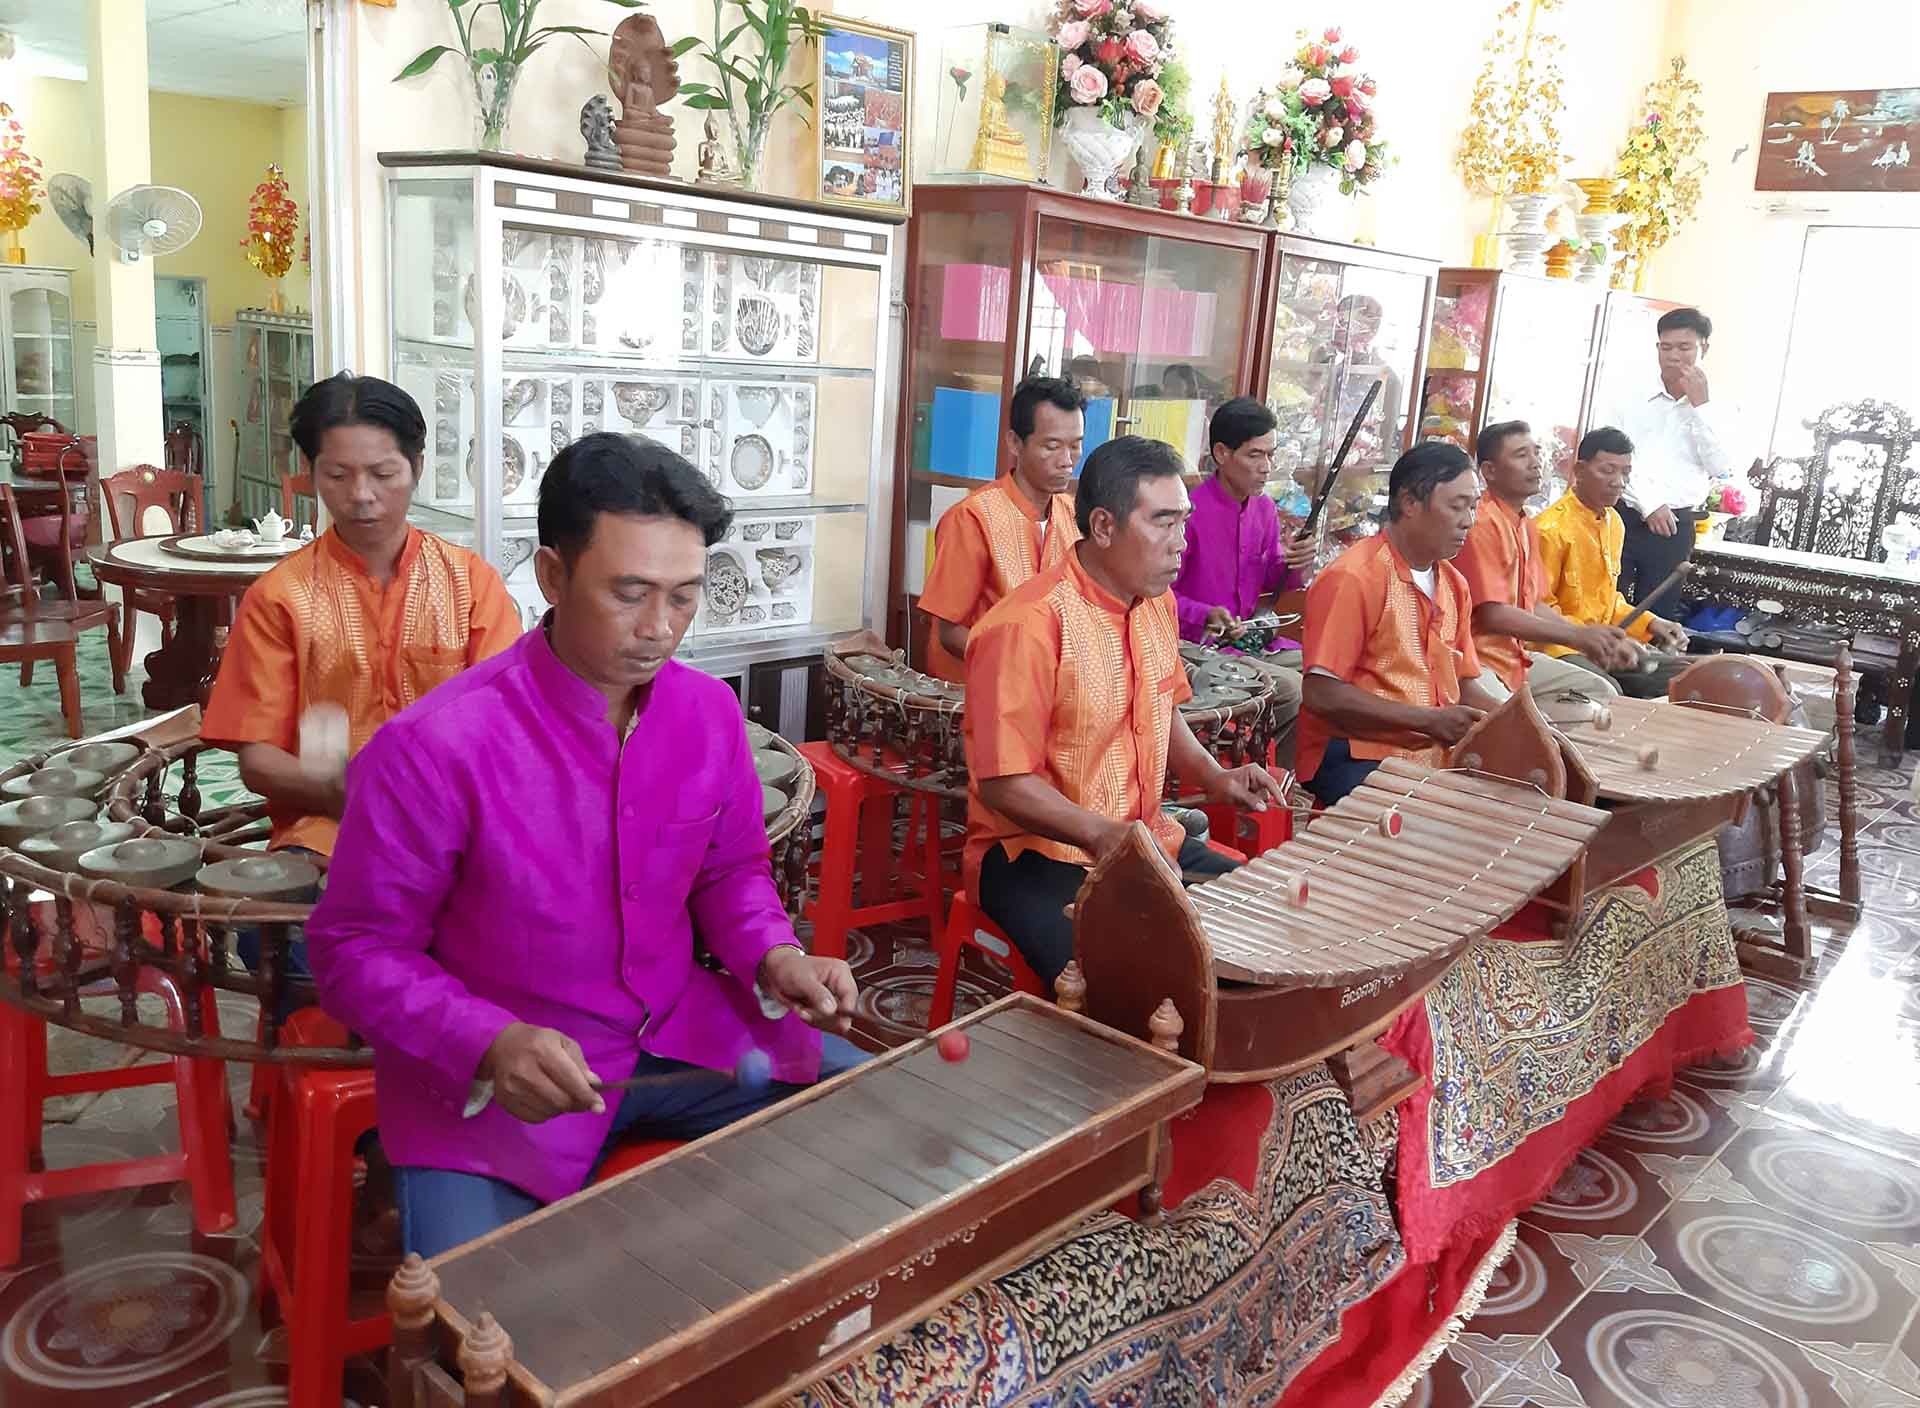 Artisans preserving intangible cultural heritages of Khmer people in Soc Trang